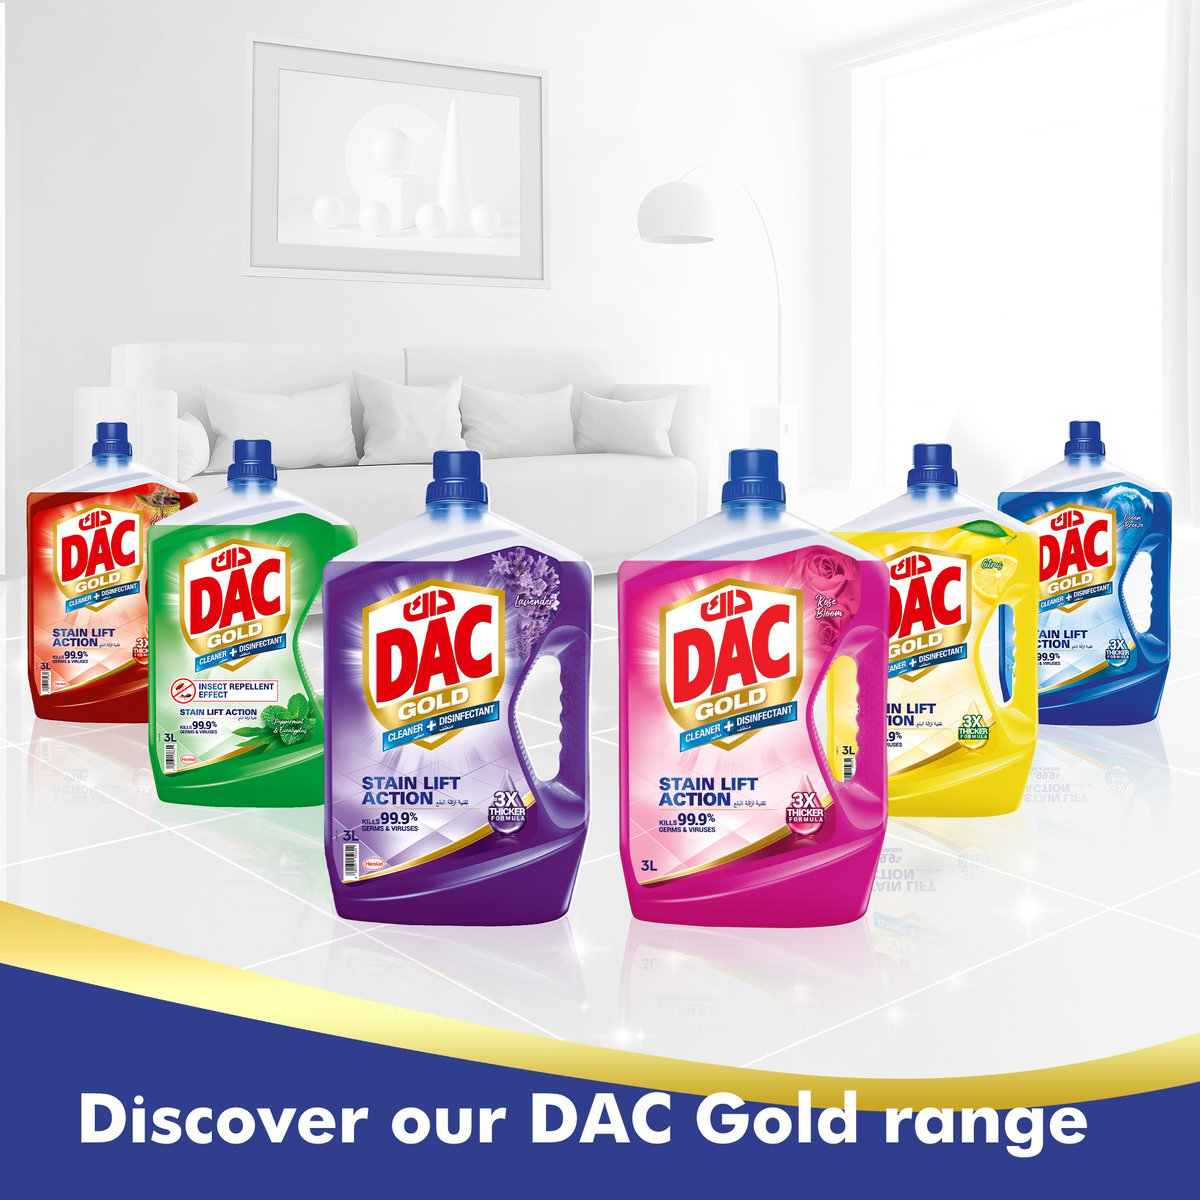 Dac Gold Peppermint & Eucalyptus Disinfectant Cleaner 1 Litre